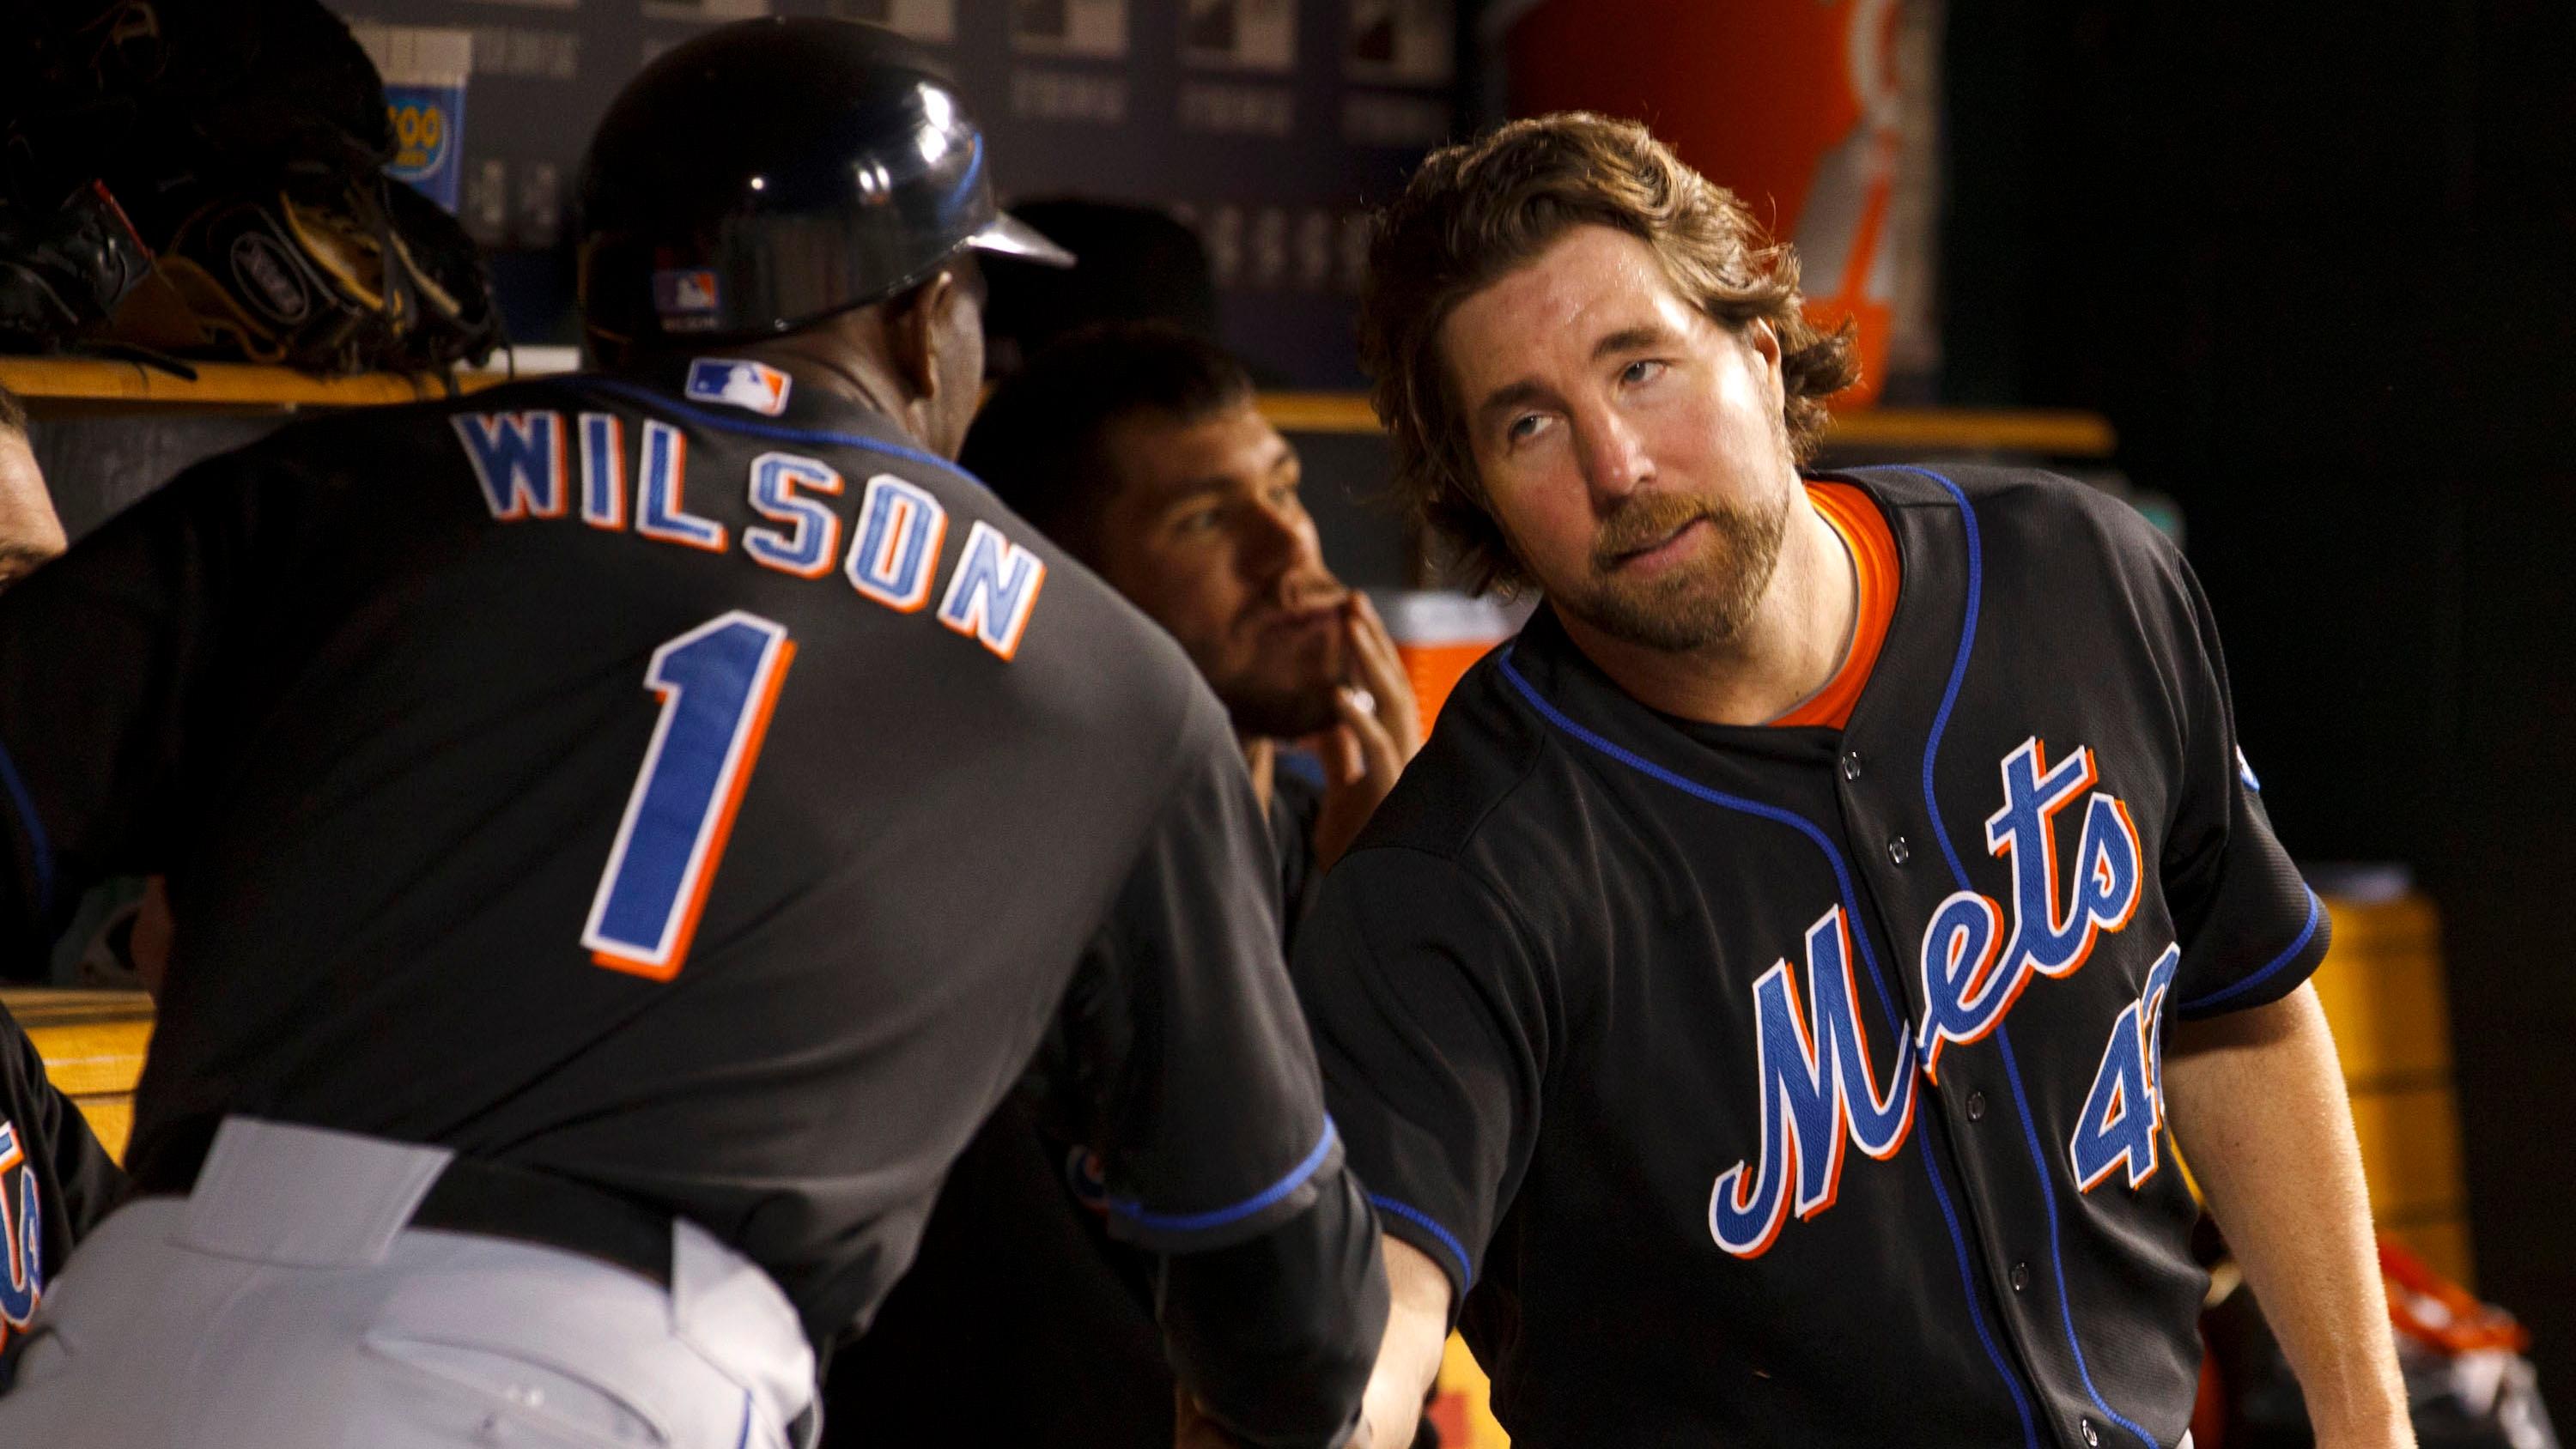 Mets RHP R.A. Dickey and coach Mookie Wilson / USA TODAY Sports